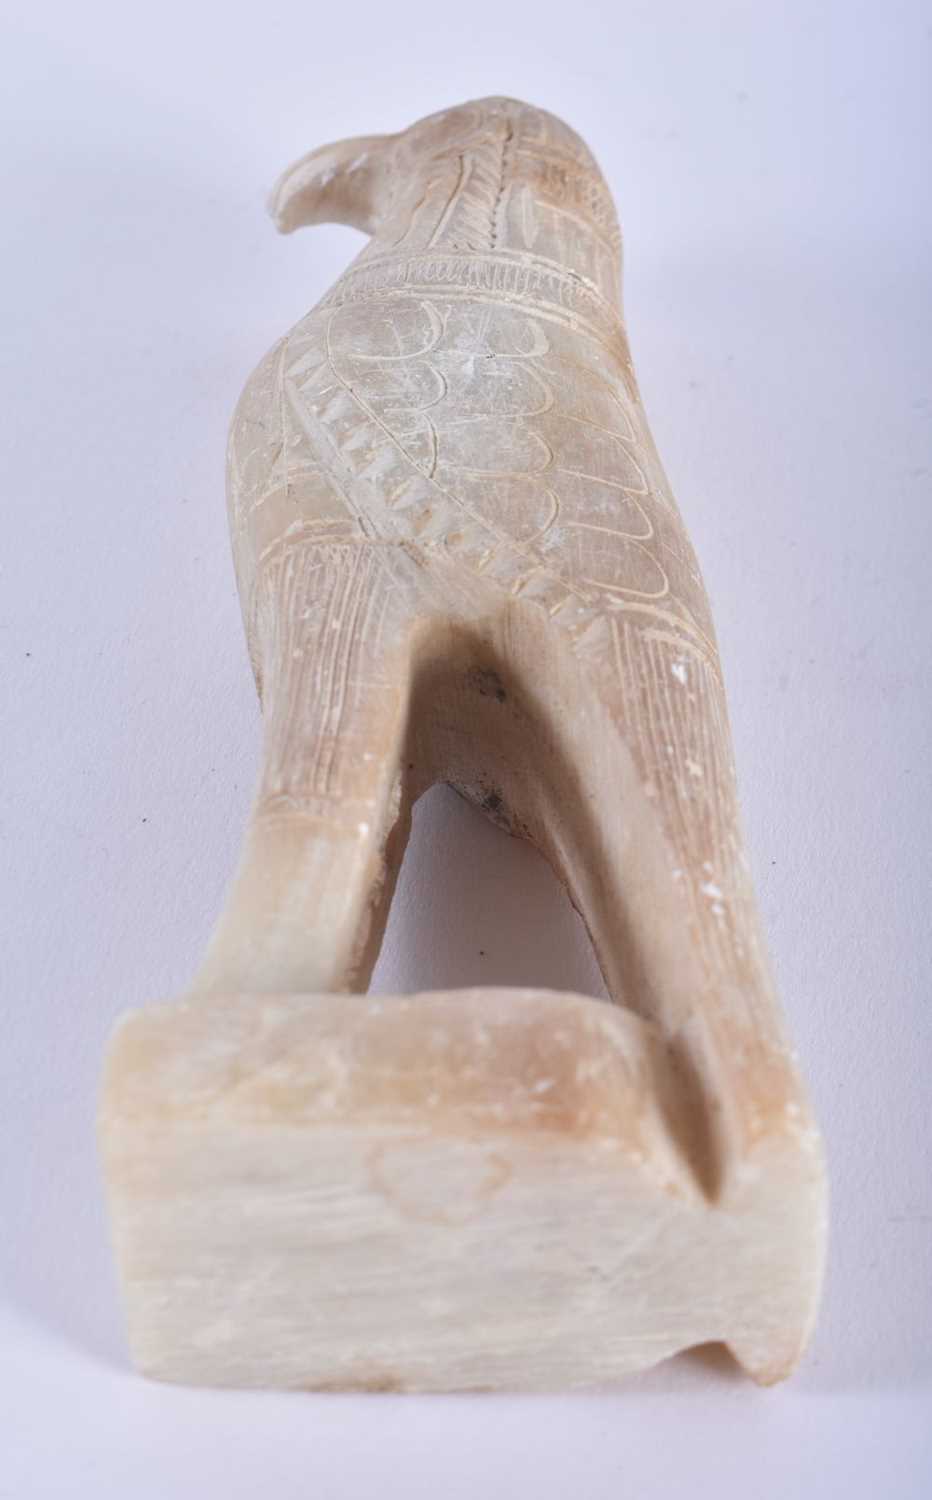 AN ANCIENT EGYPTIAN STYLE ALABASTER STATUE OF THE GODDESS HORUS. Possibly 664-332 BC. 15 cm high. - Image 4 of 4